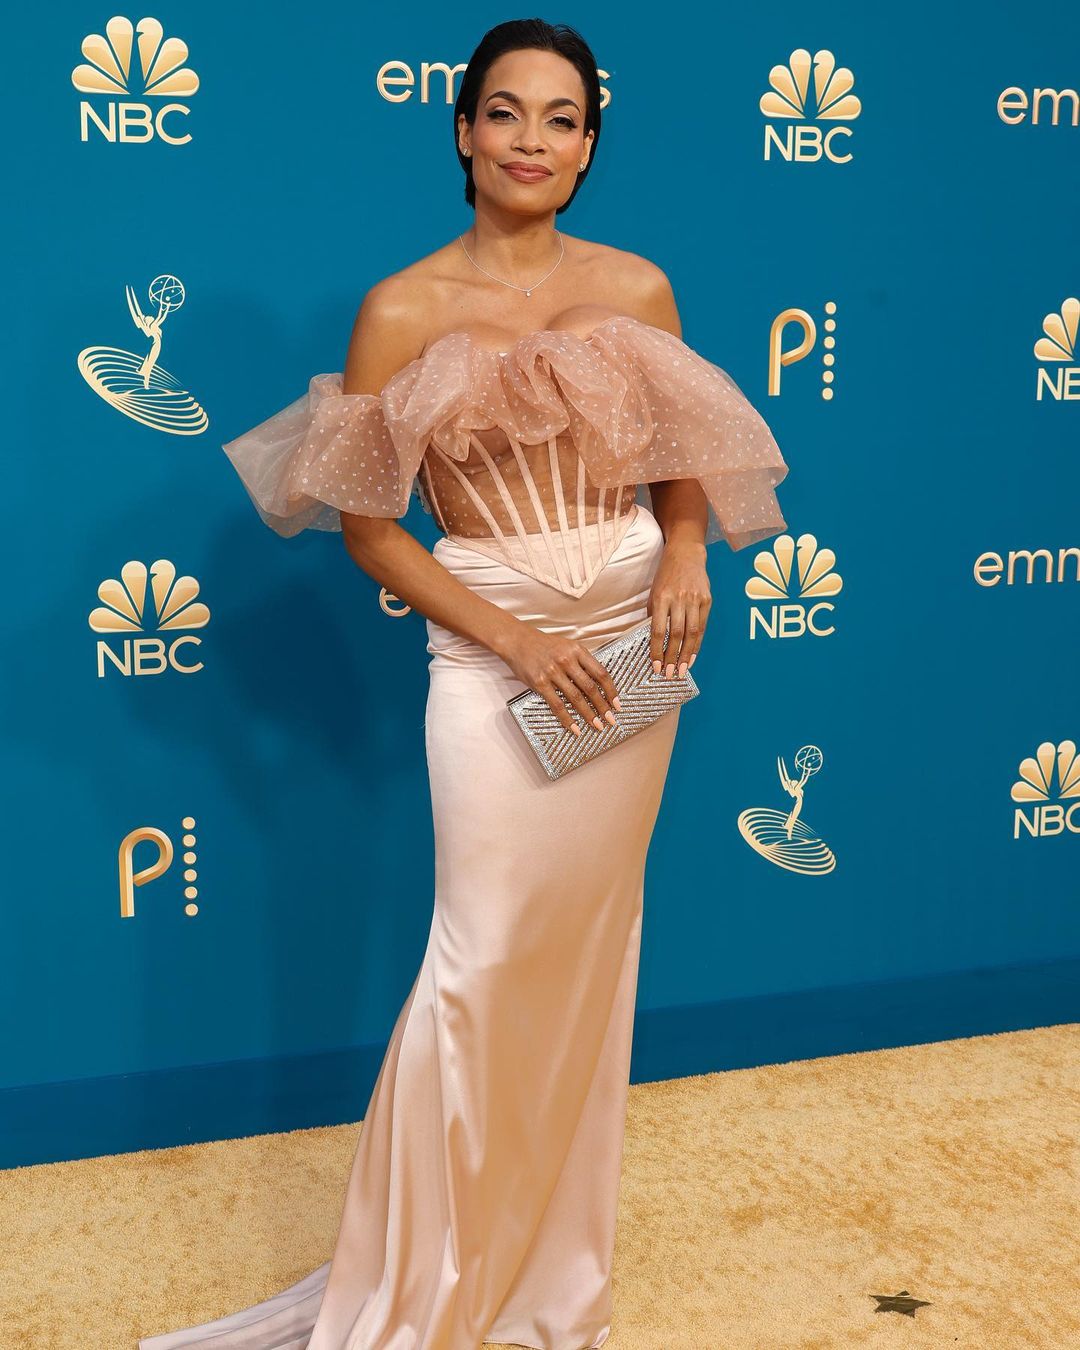 Rosario Dawson looks lovely in a Christian Siriano corset top and satin skirt